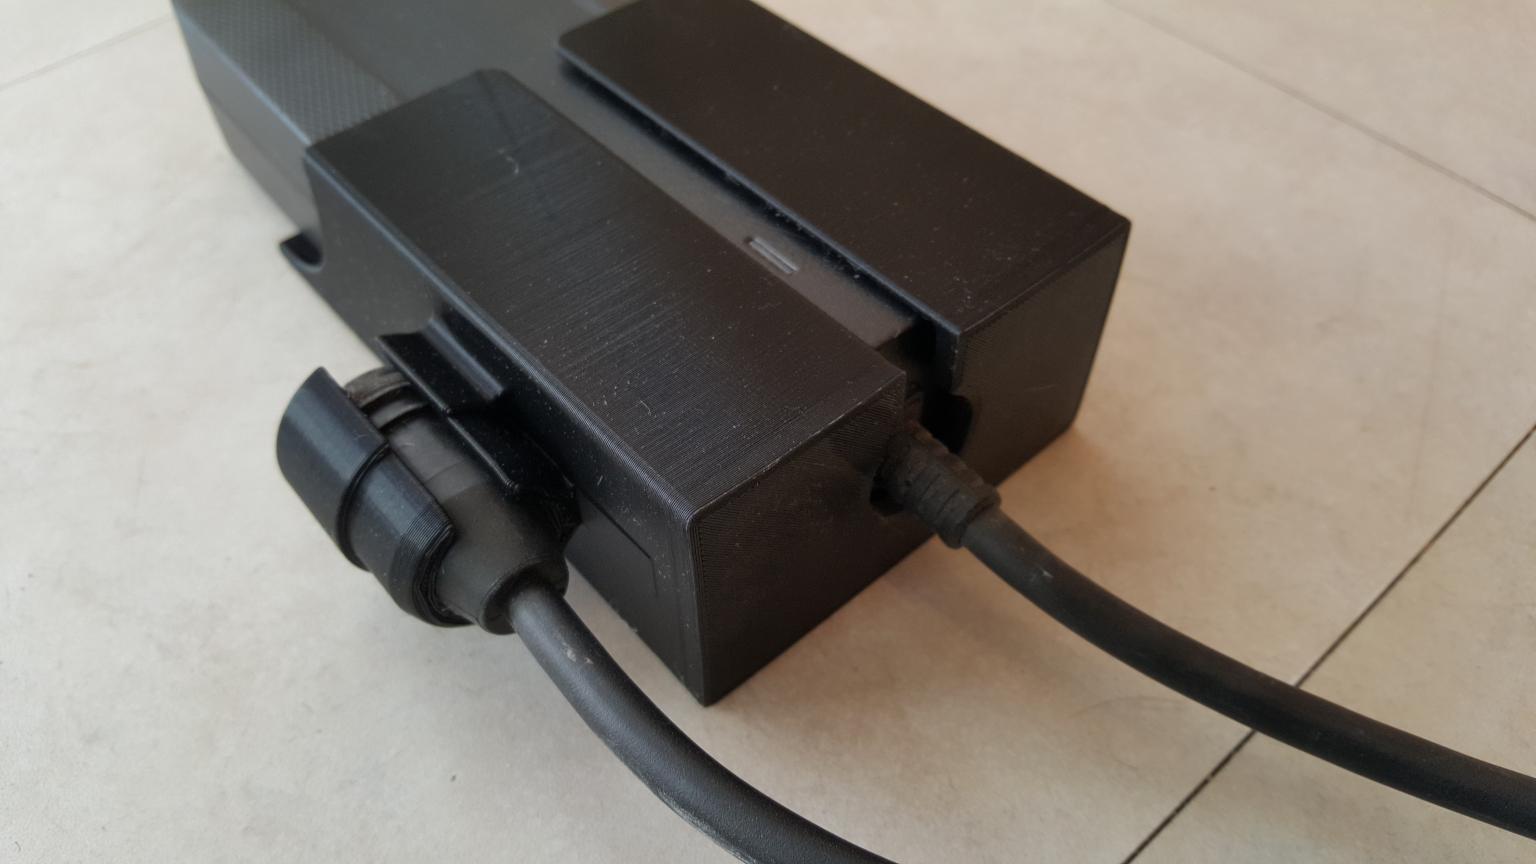 Details about   Specialized Turbo Levo Mains Charger Wall Holder 